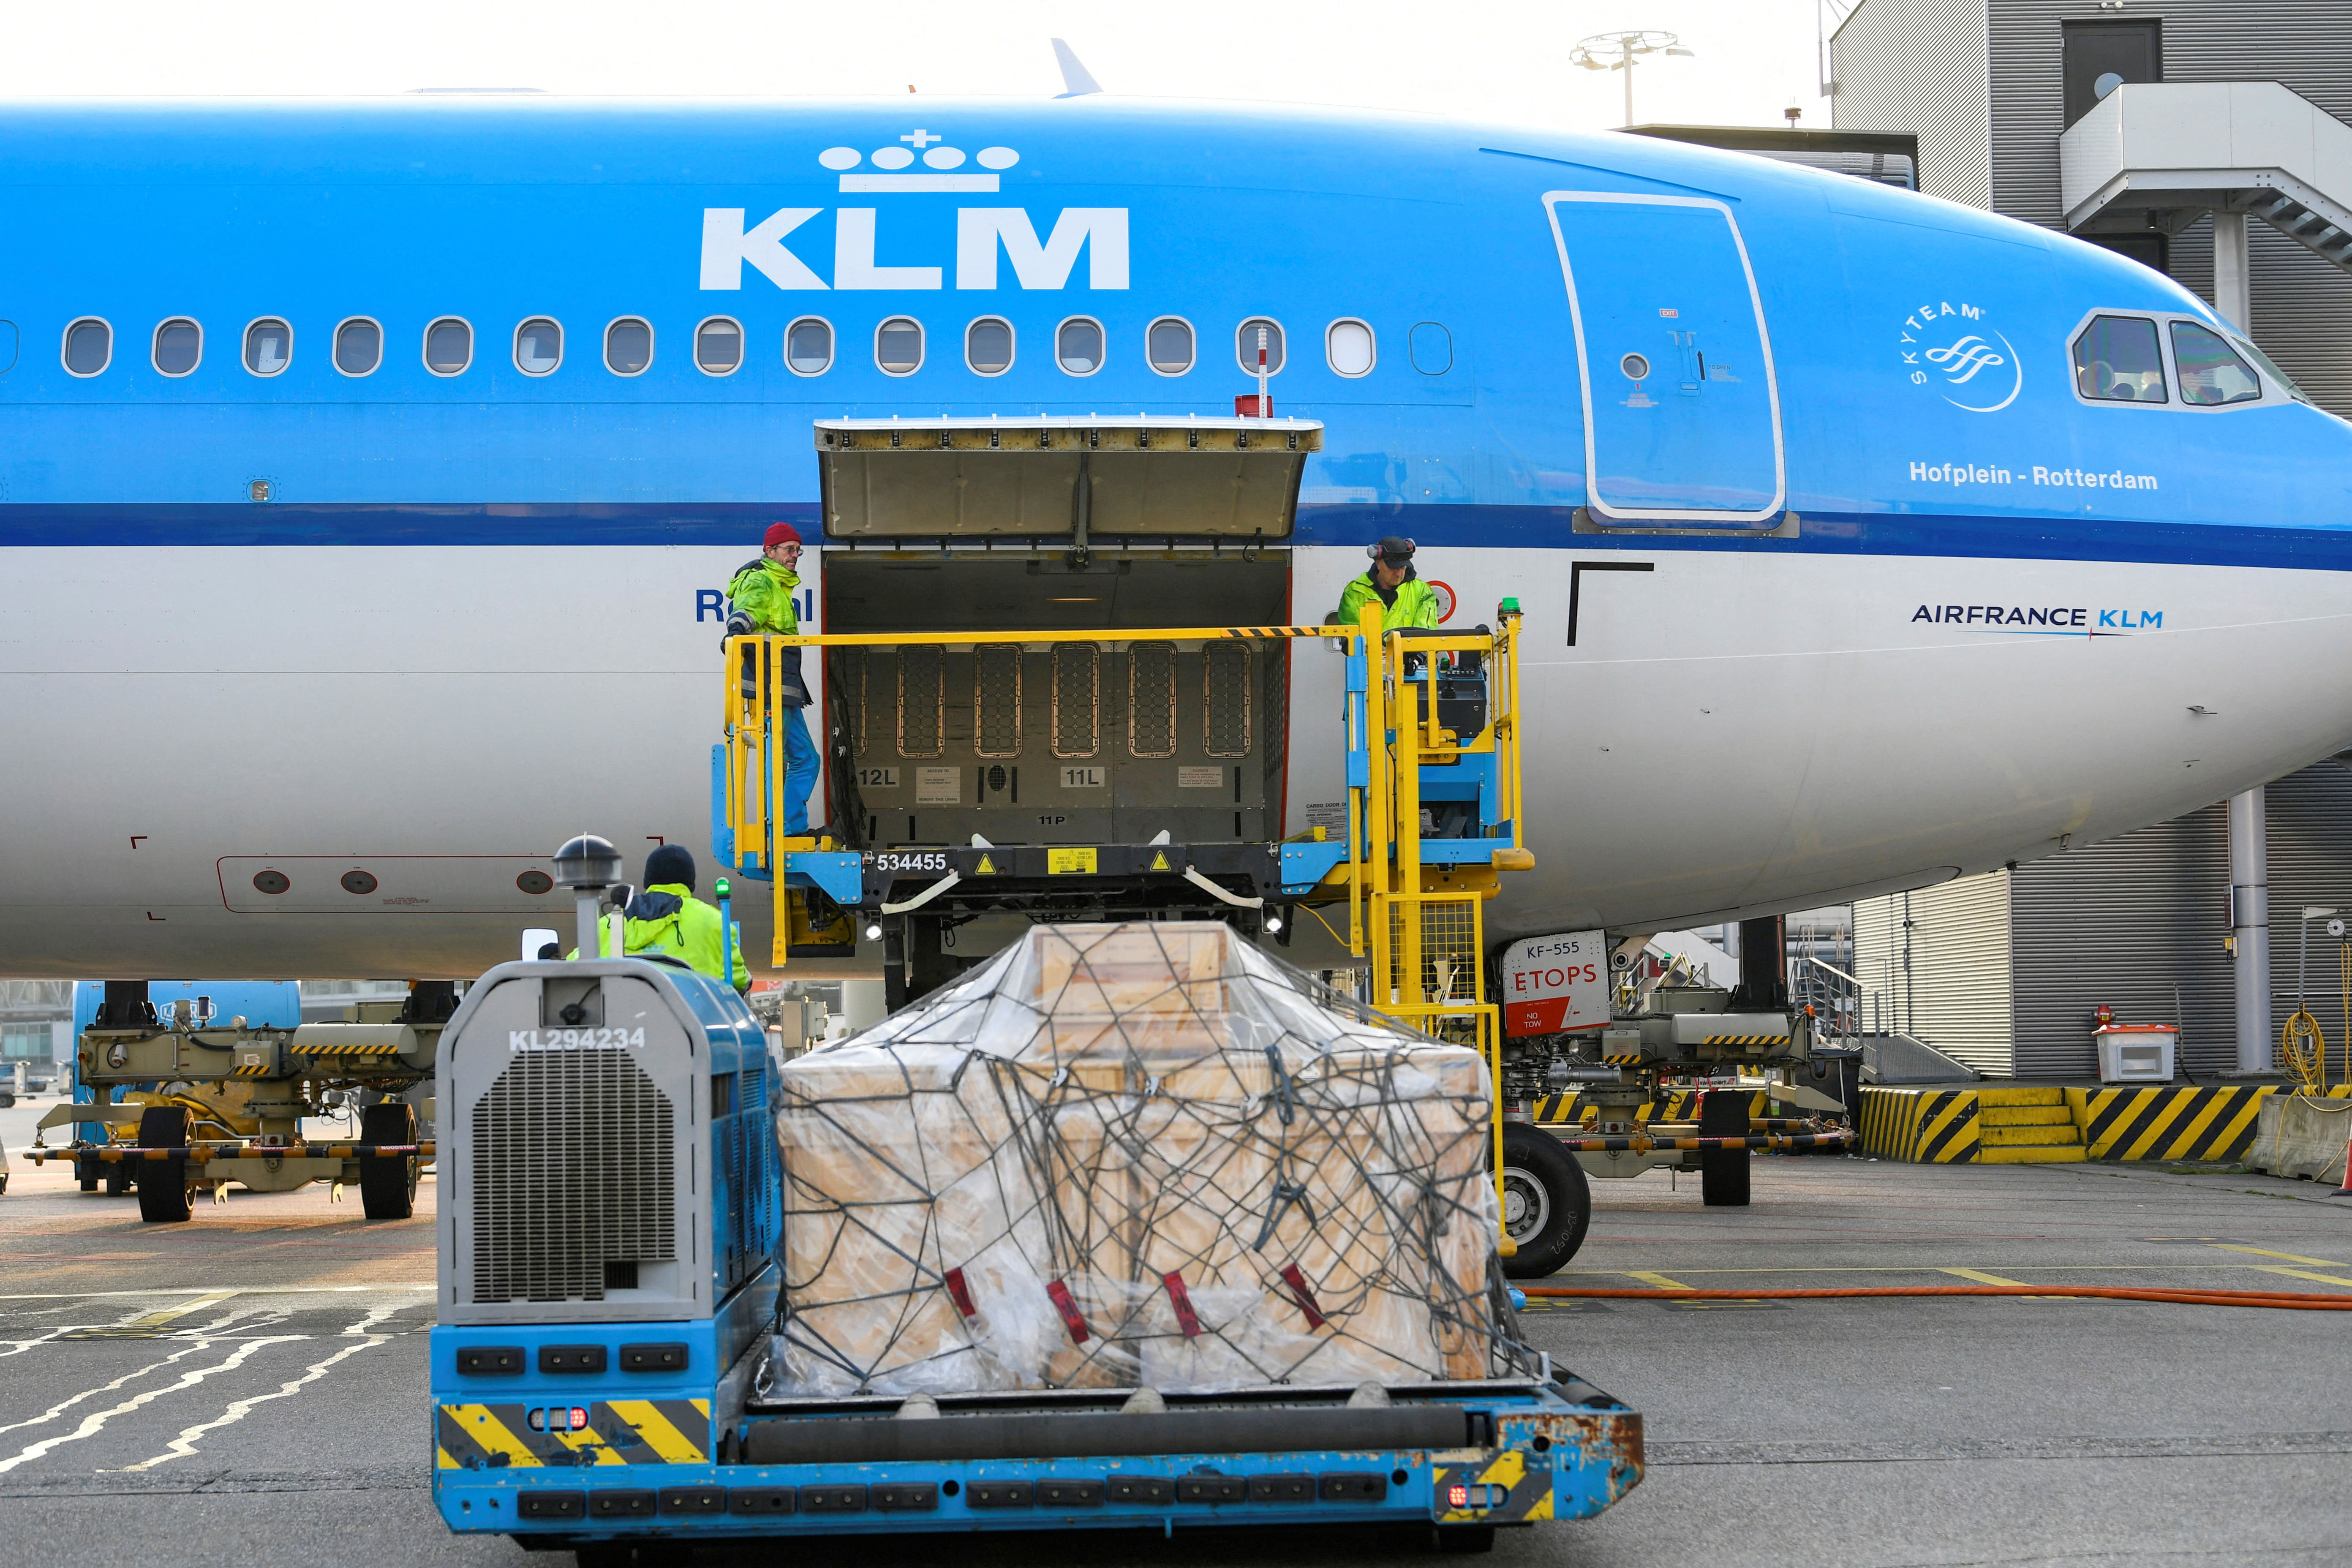 Cooled packages are being transported by airplane at the Schiphol Airport as Air France-KLM's cargo operations are preparing a massive logistical operation carrying new vaccines and vaccine candidates for COVID-19 through Amsterdam's Schiphol Airport, Netherlands November 25, 2020.  REUTERS/Piroschka van de Wouw/File Photo